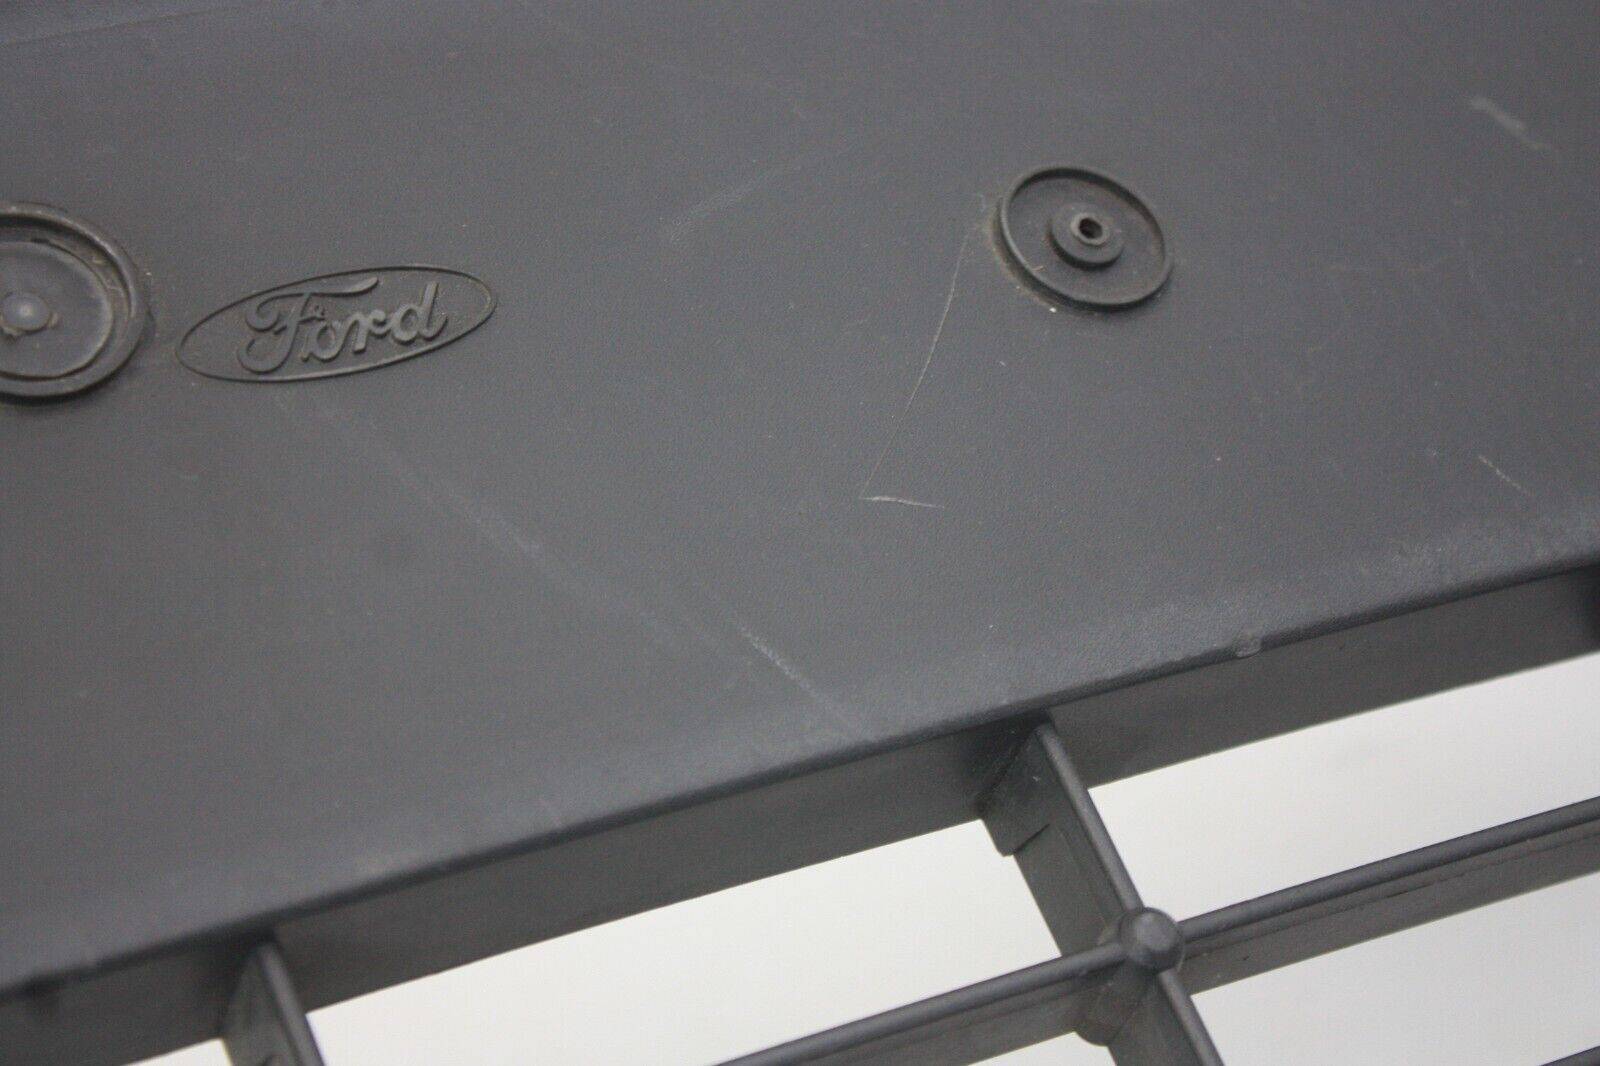 Ford-Focus-Front-Bumper-Grill-2008-TO-2011-8M51-17B968-BE-Genuine-SEE-PICS-175622452576-7